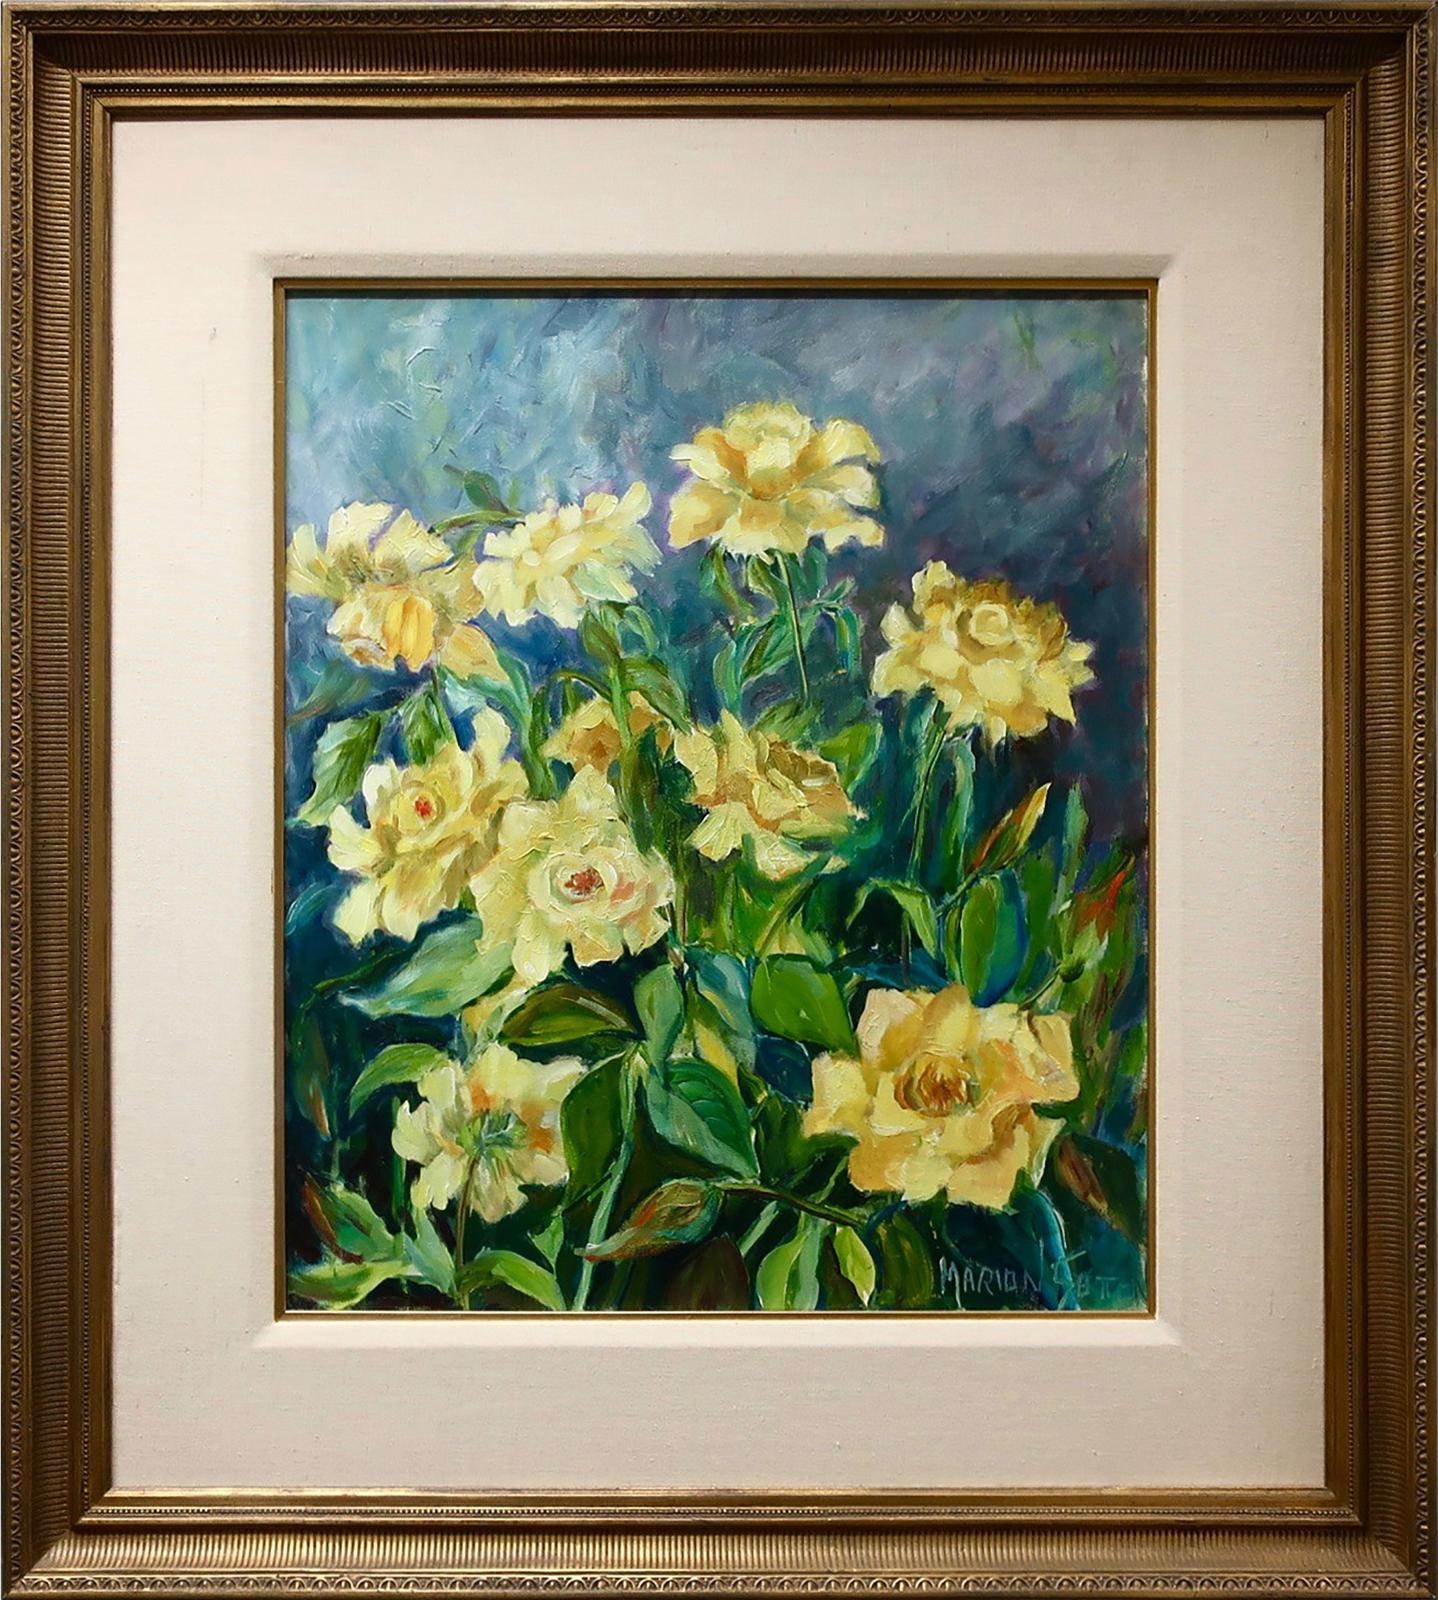 Marion Isobel Sutton (1922-2011) - Untitled ( Yellow Flowers)